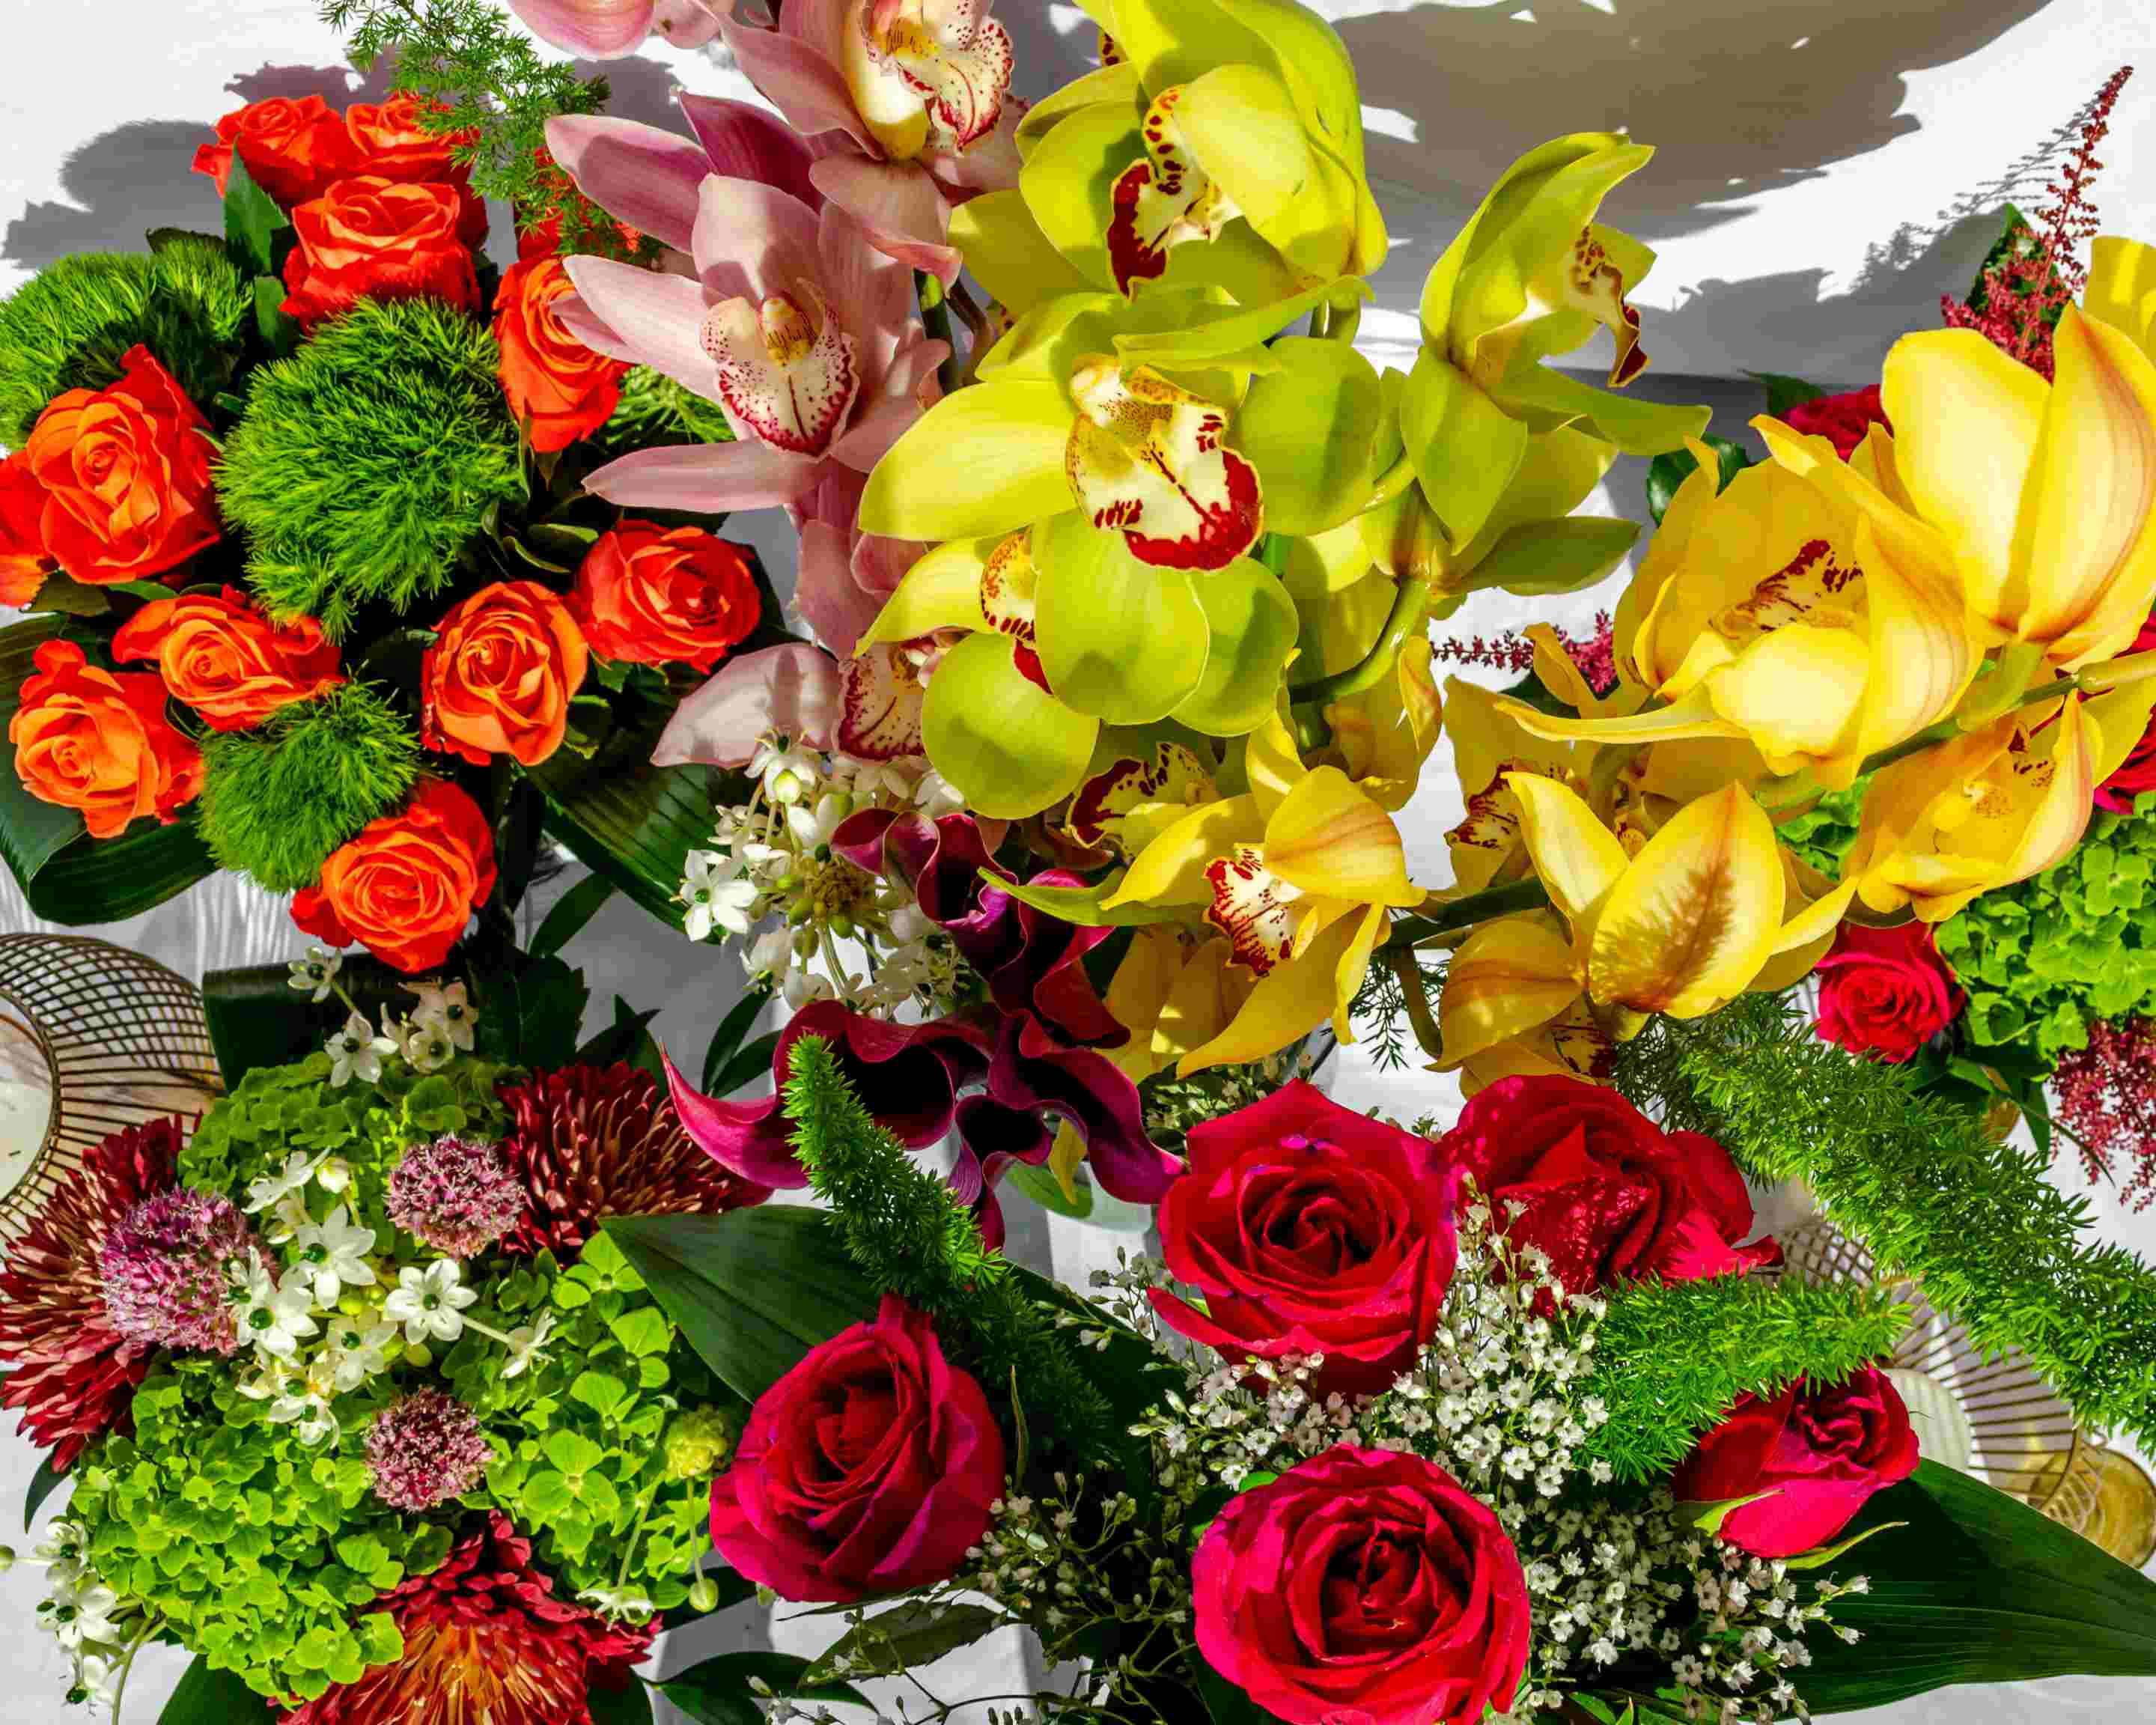 Bulk Flowers Delivered by Proflowers